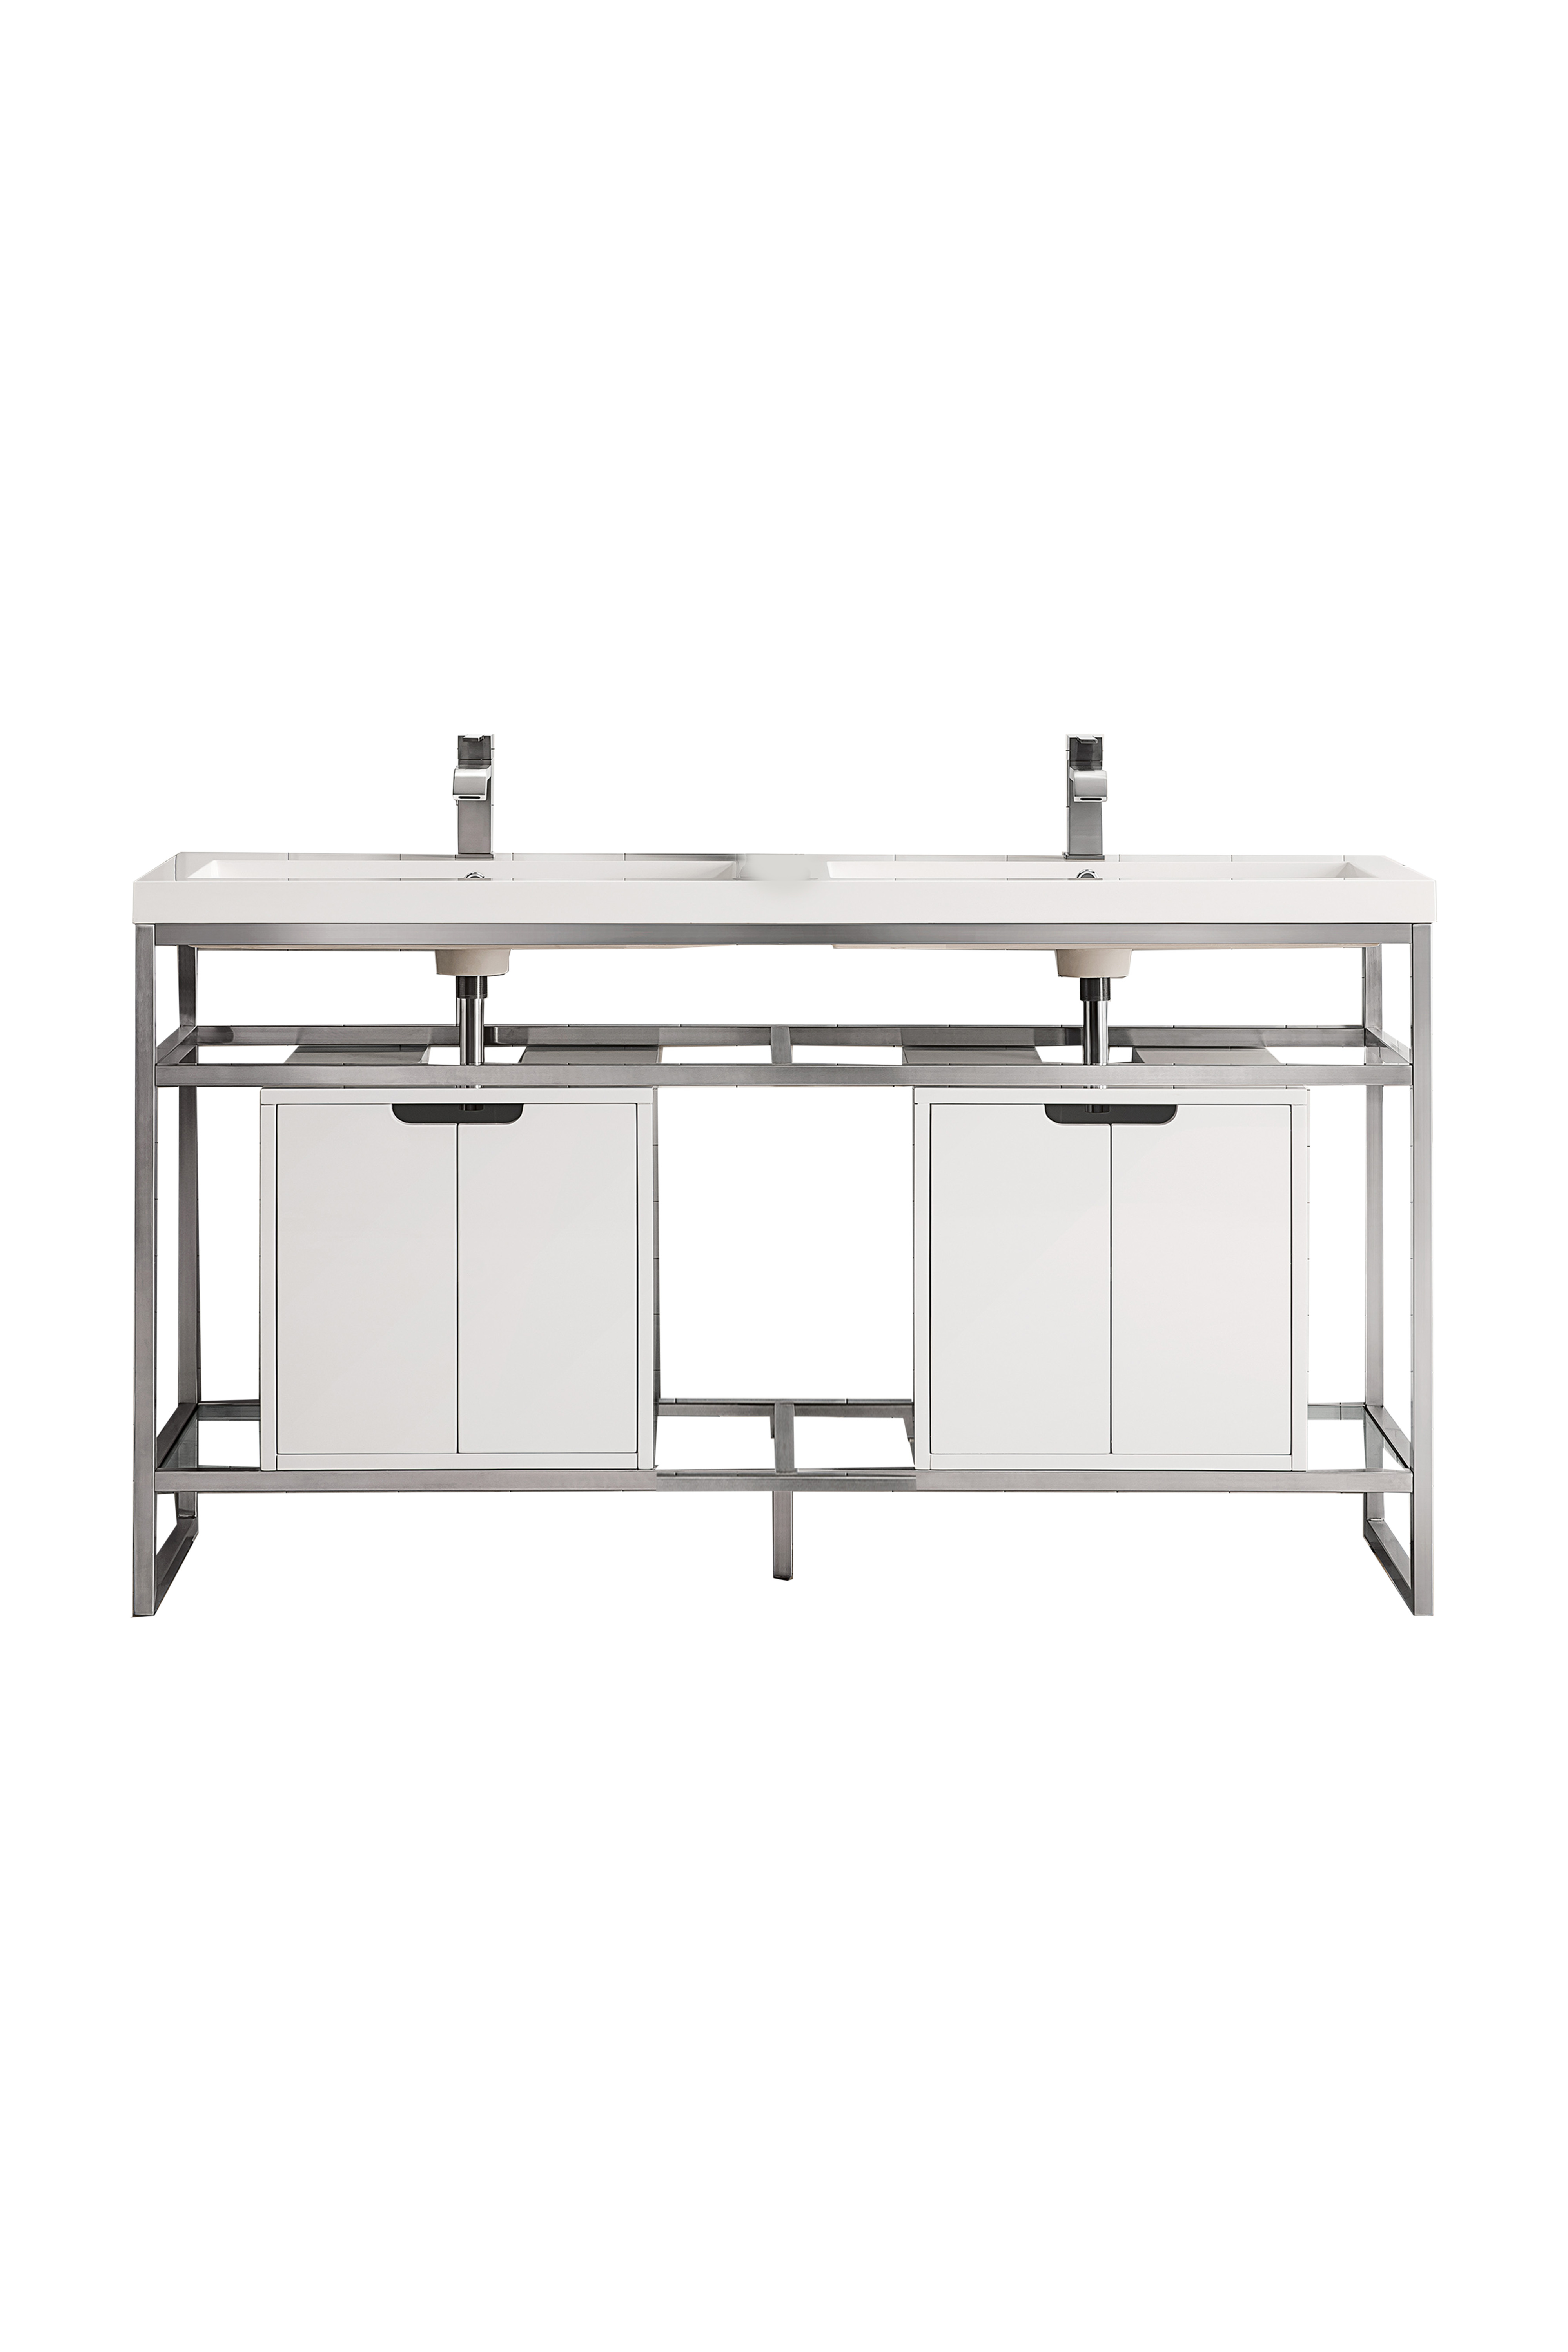 James Martin C105V63BNKSCGWWG Boston 63" Stainless Steel Sink Console (Double Basins), Brushed Nickel w/ Glossy White Storage Cabinet, White Glossy Composite Countertop